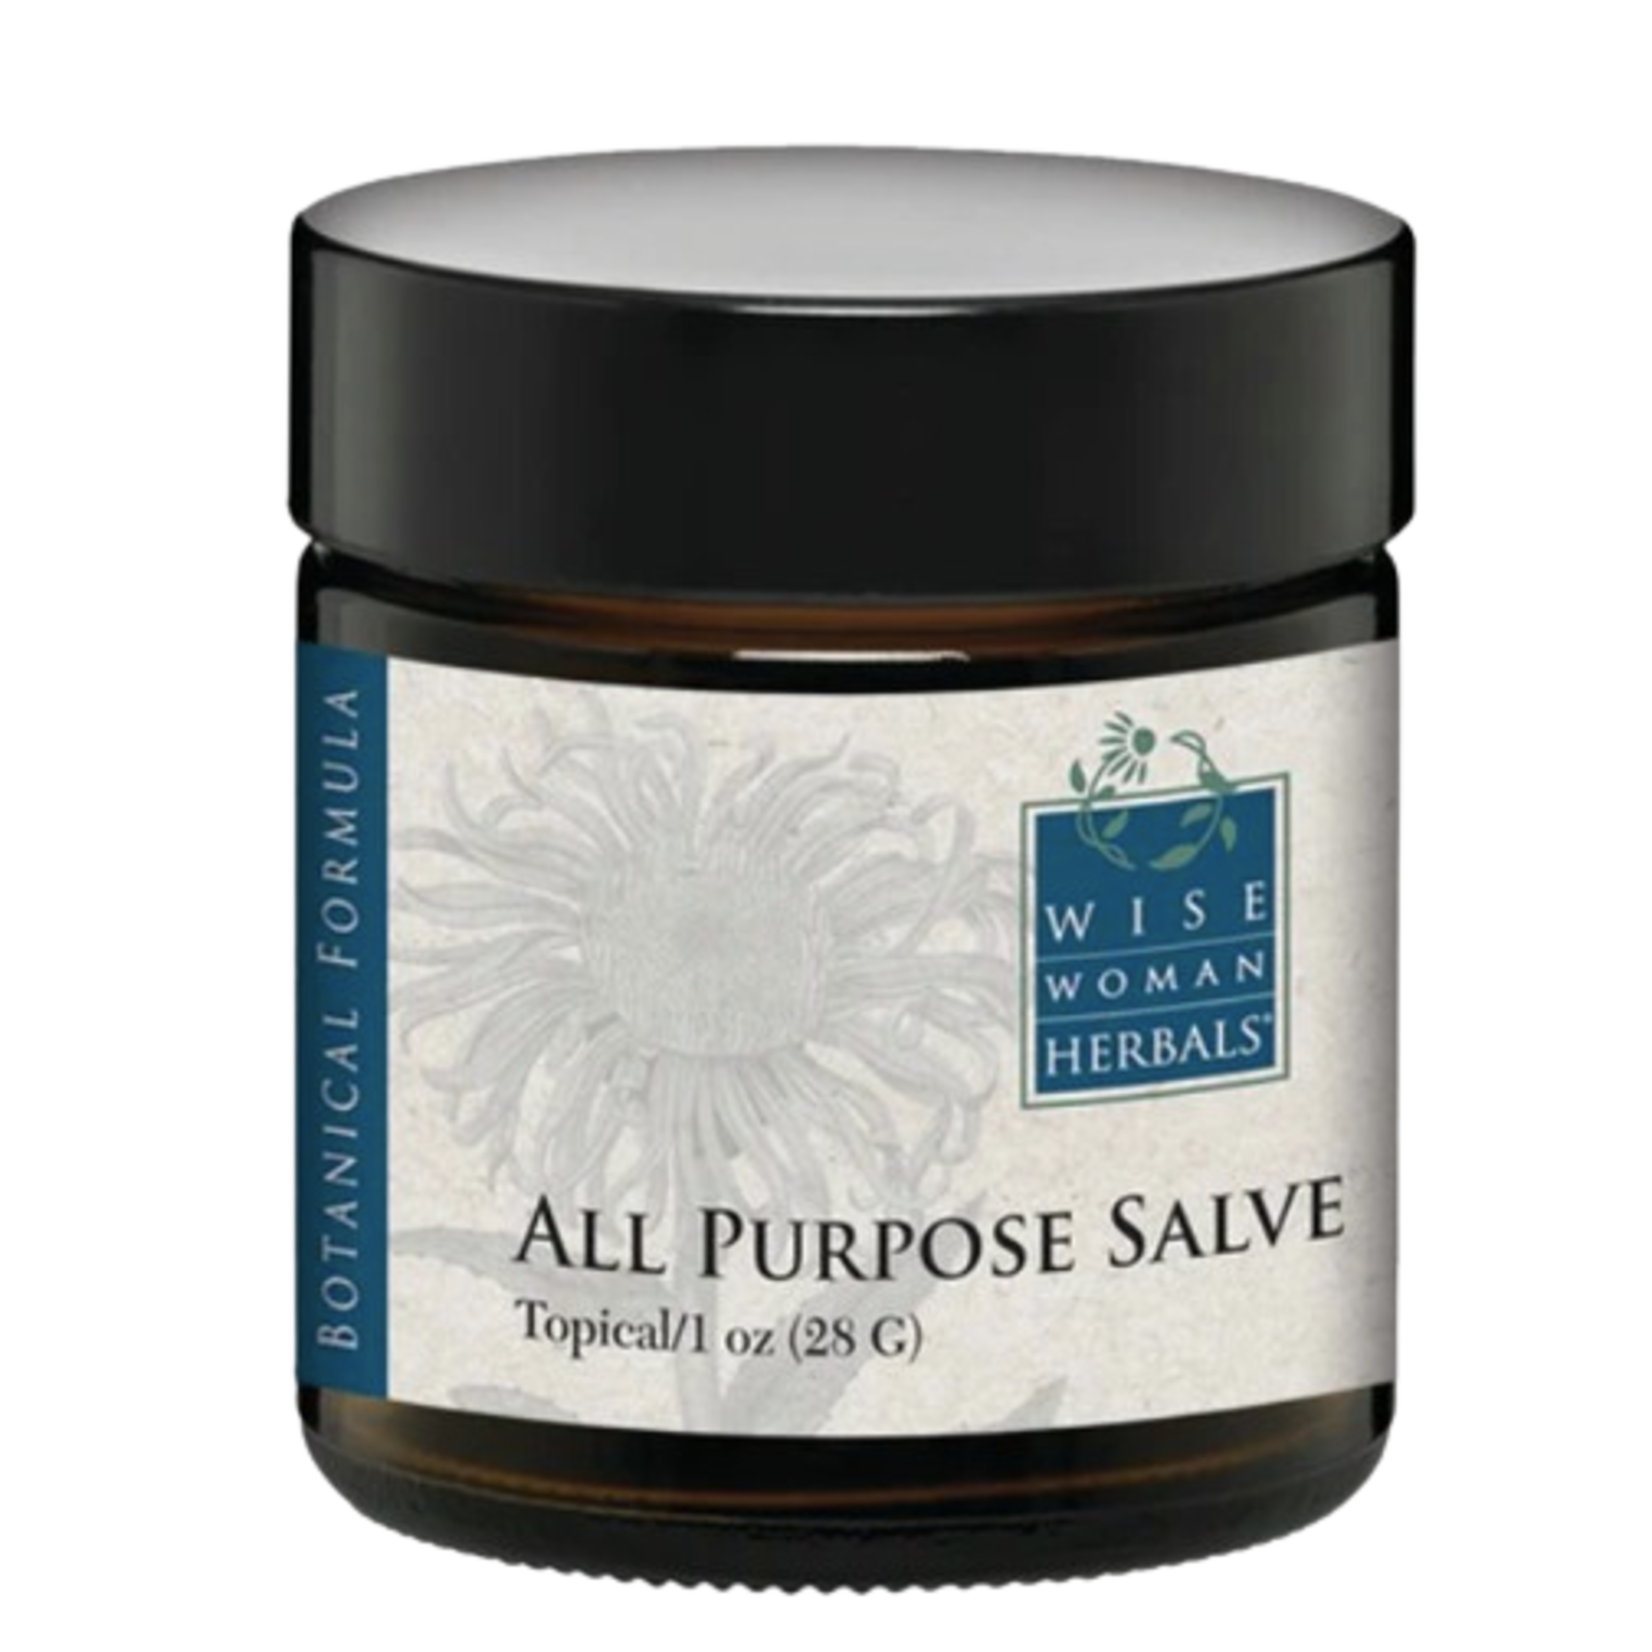 All Purpose Salve (Wise Woman Herbals)